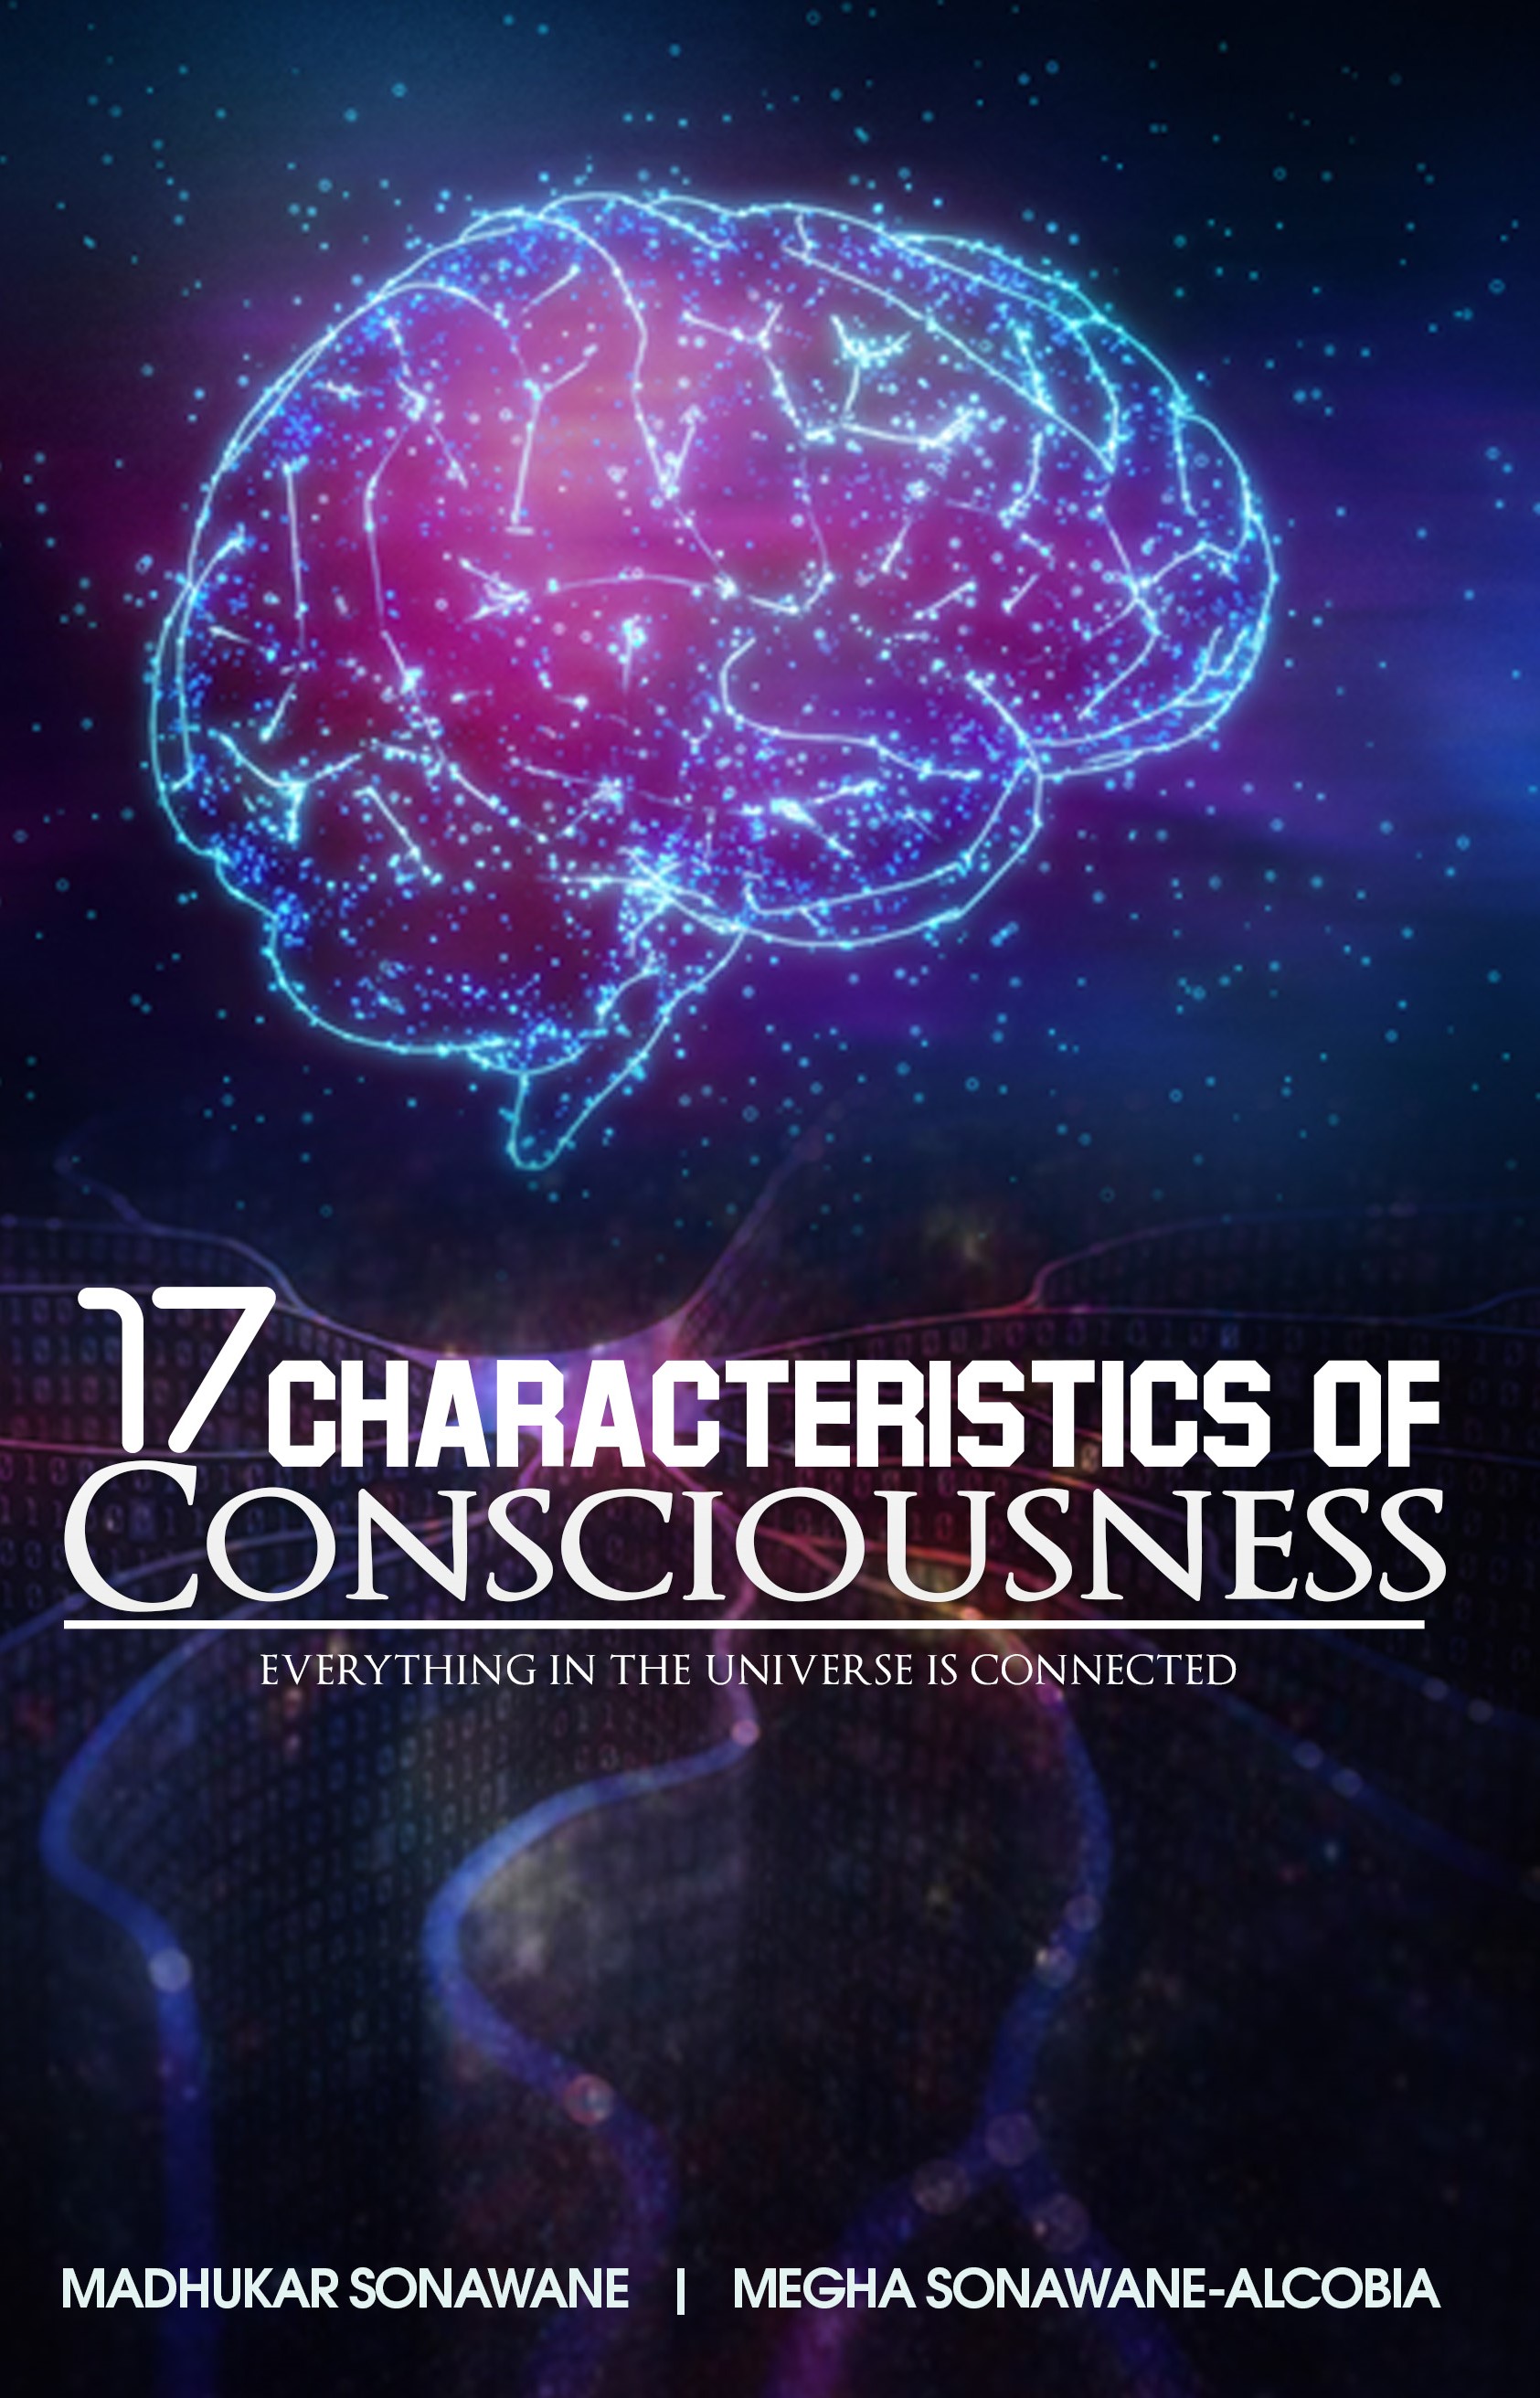 FREE: 17 Characteristics of Consciousness: Everything in The Universe is Connected by Madhukar Sonawane & Megha Sonawane-Alcobia